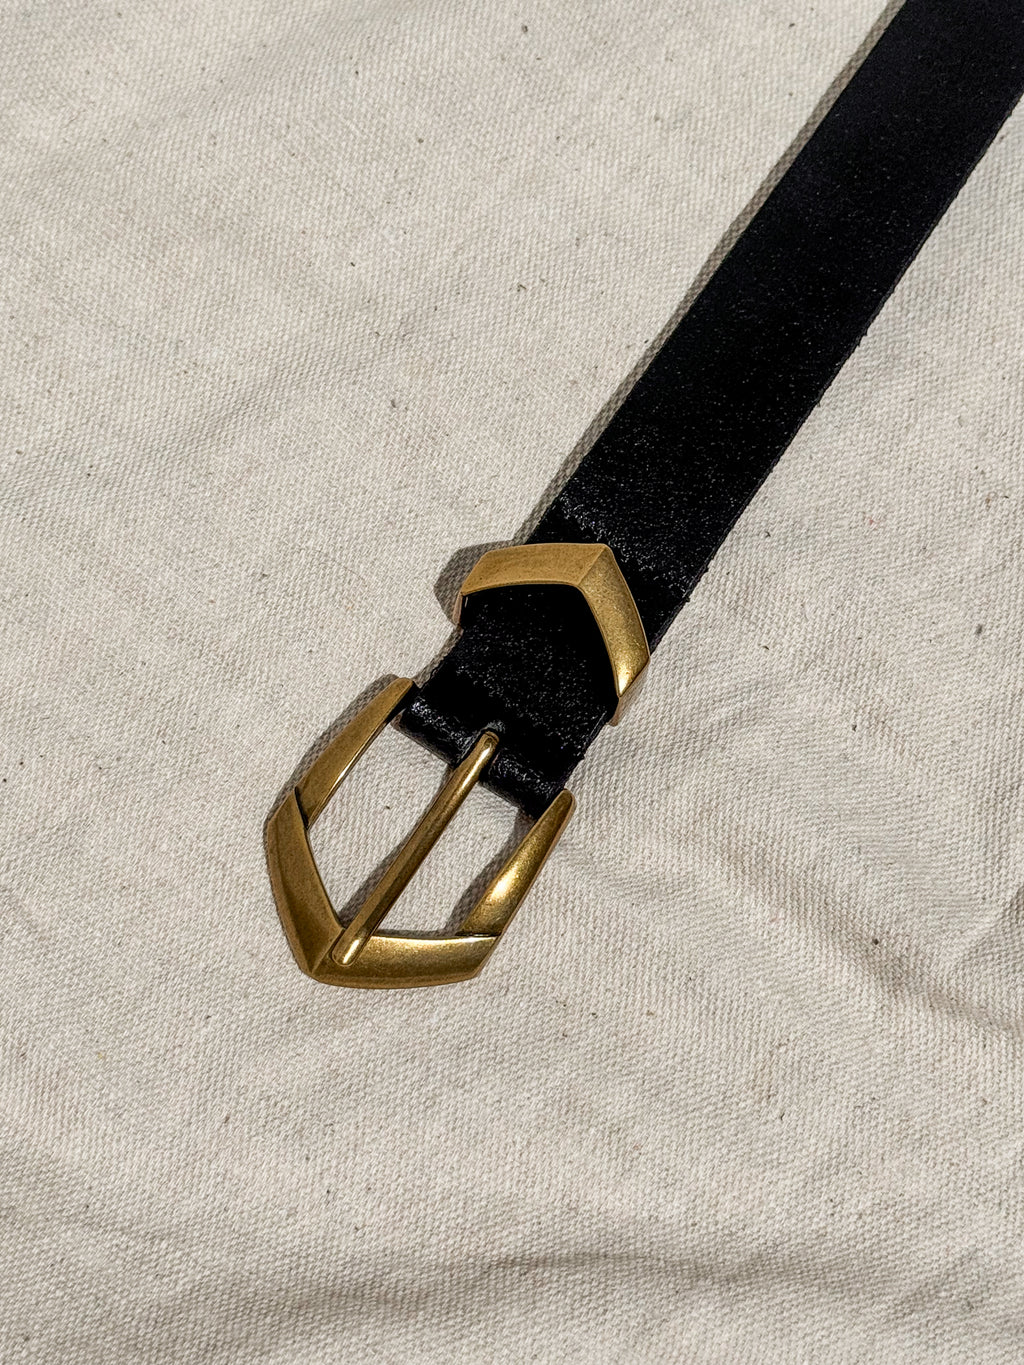 Triangular Buckle Leather Belt in Black - Stitch And Feather